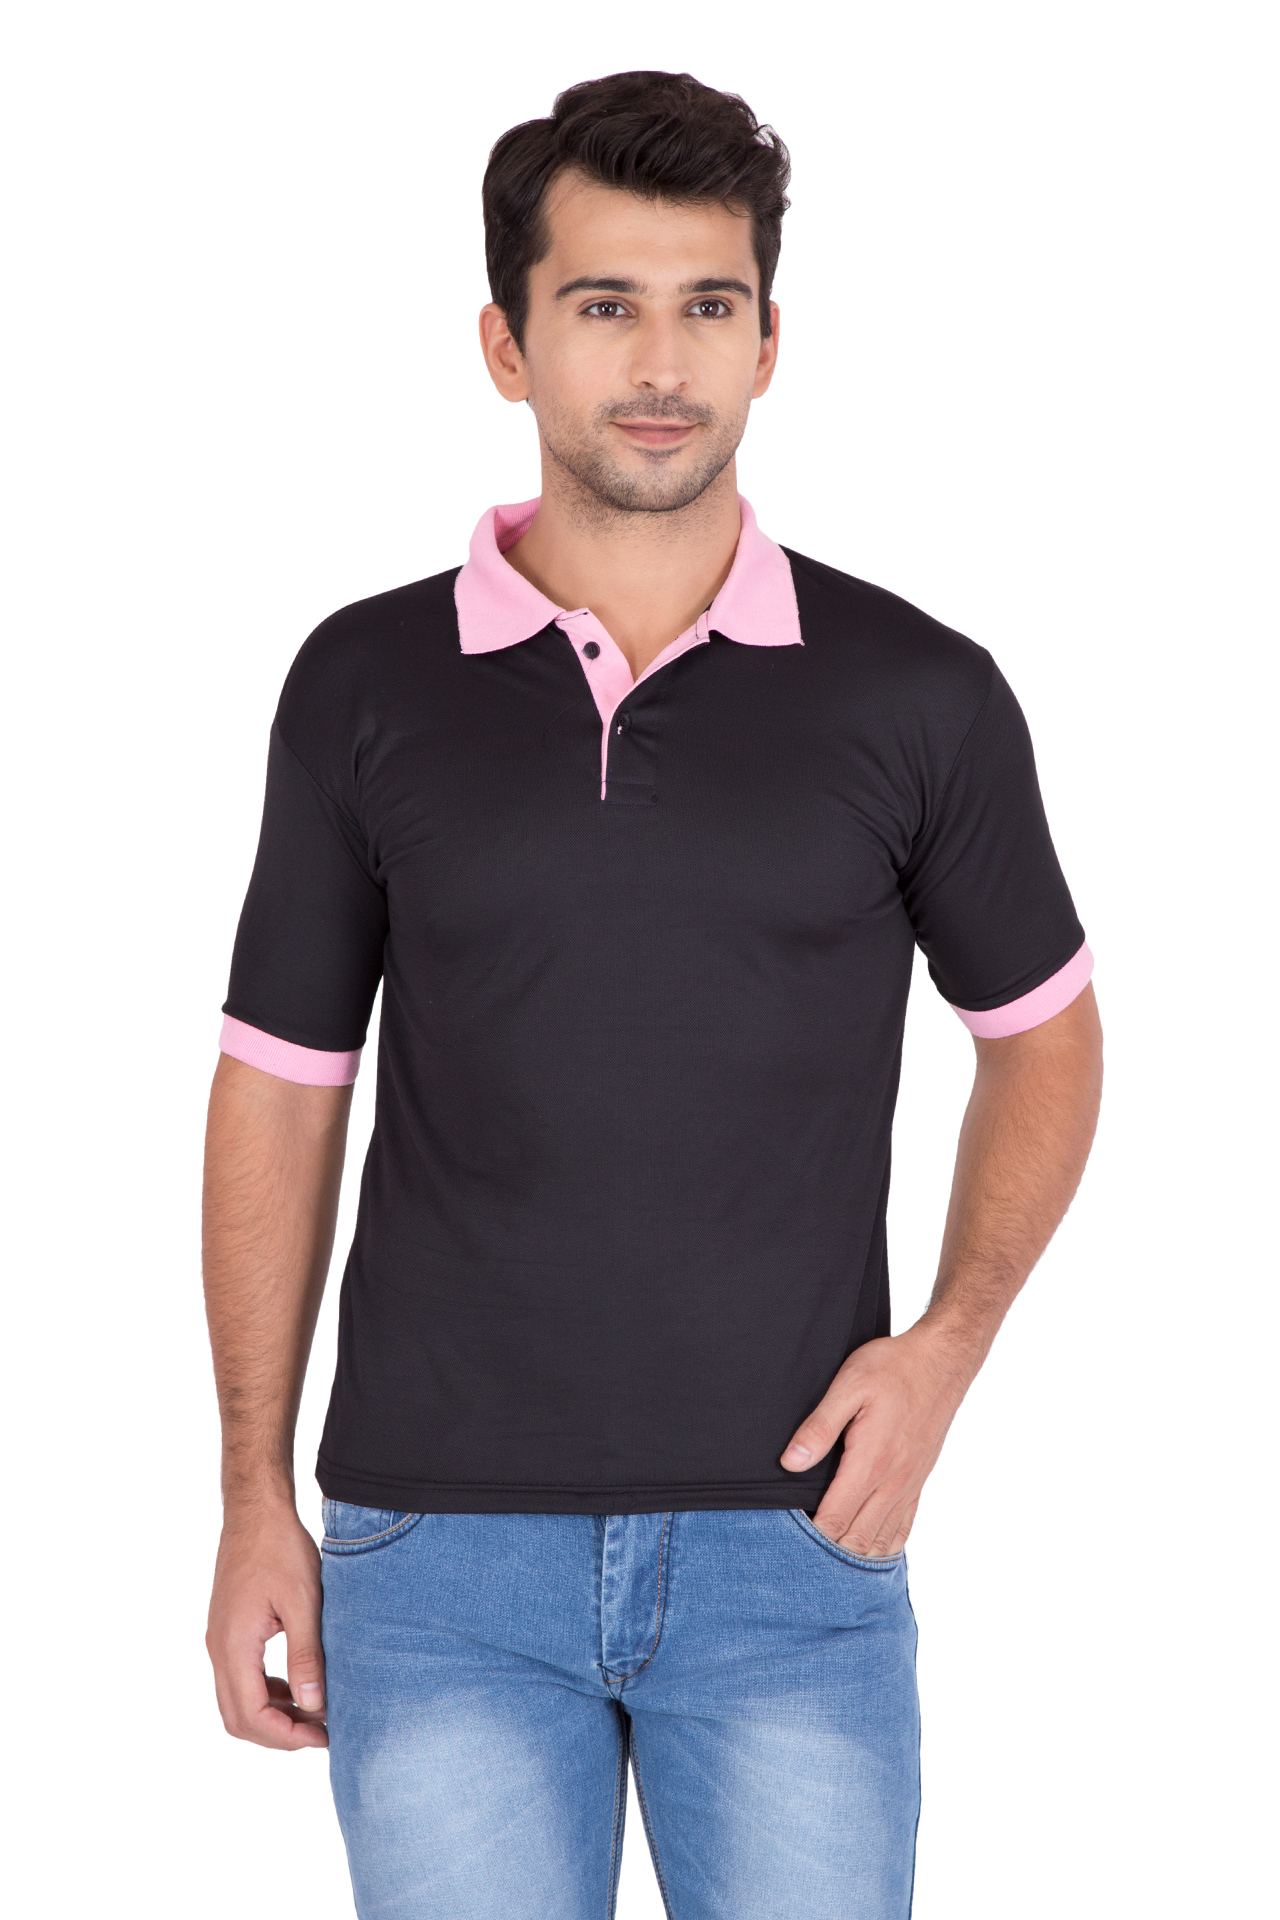 Buy Concepts Black Polo with Pink detailing Online @ ₹299 from ShopClues